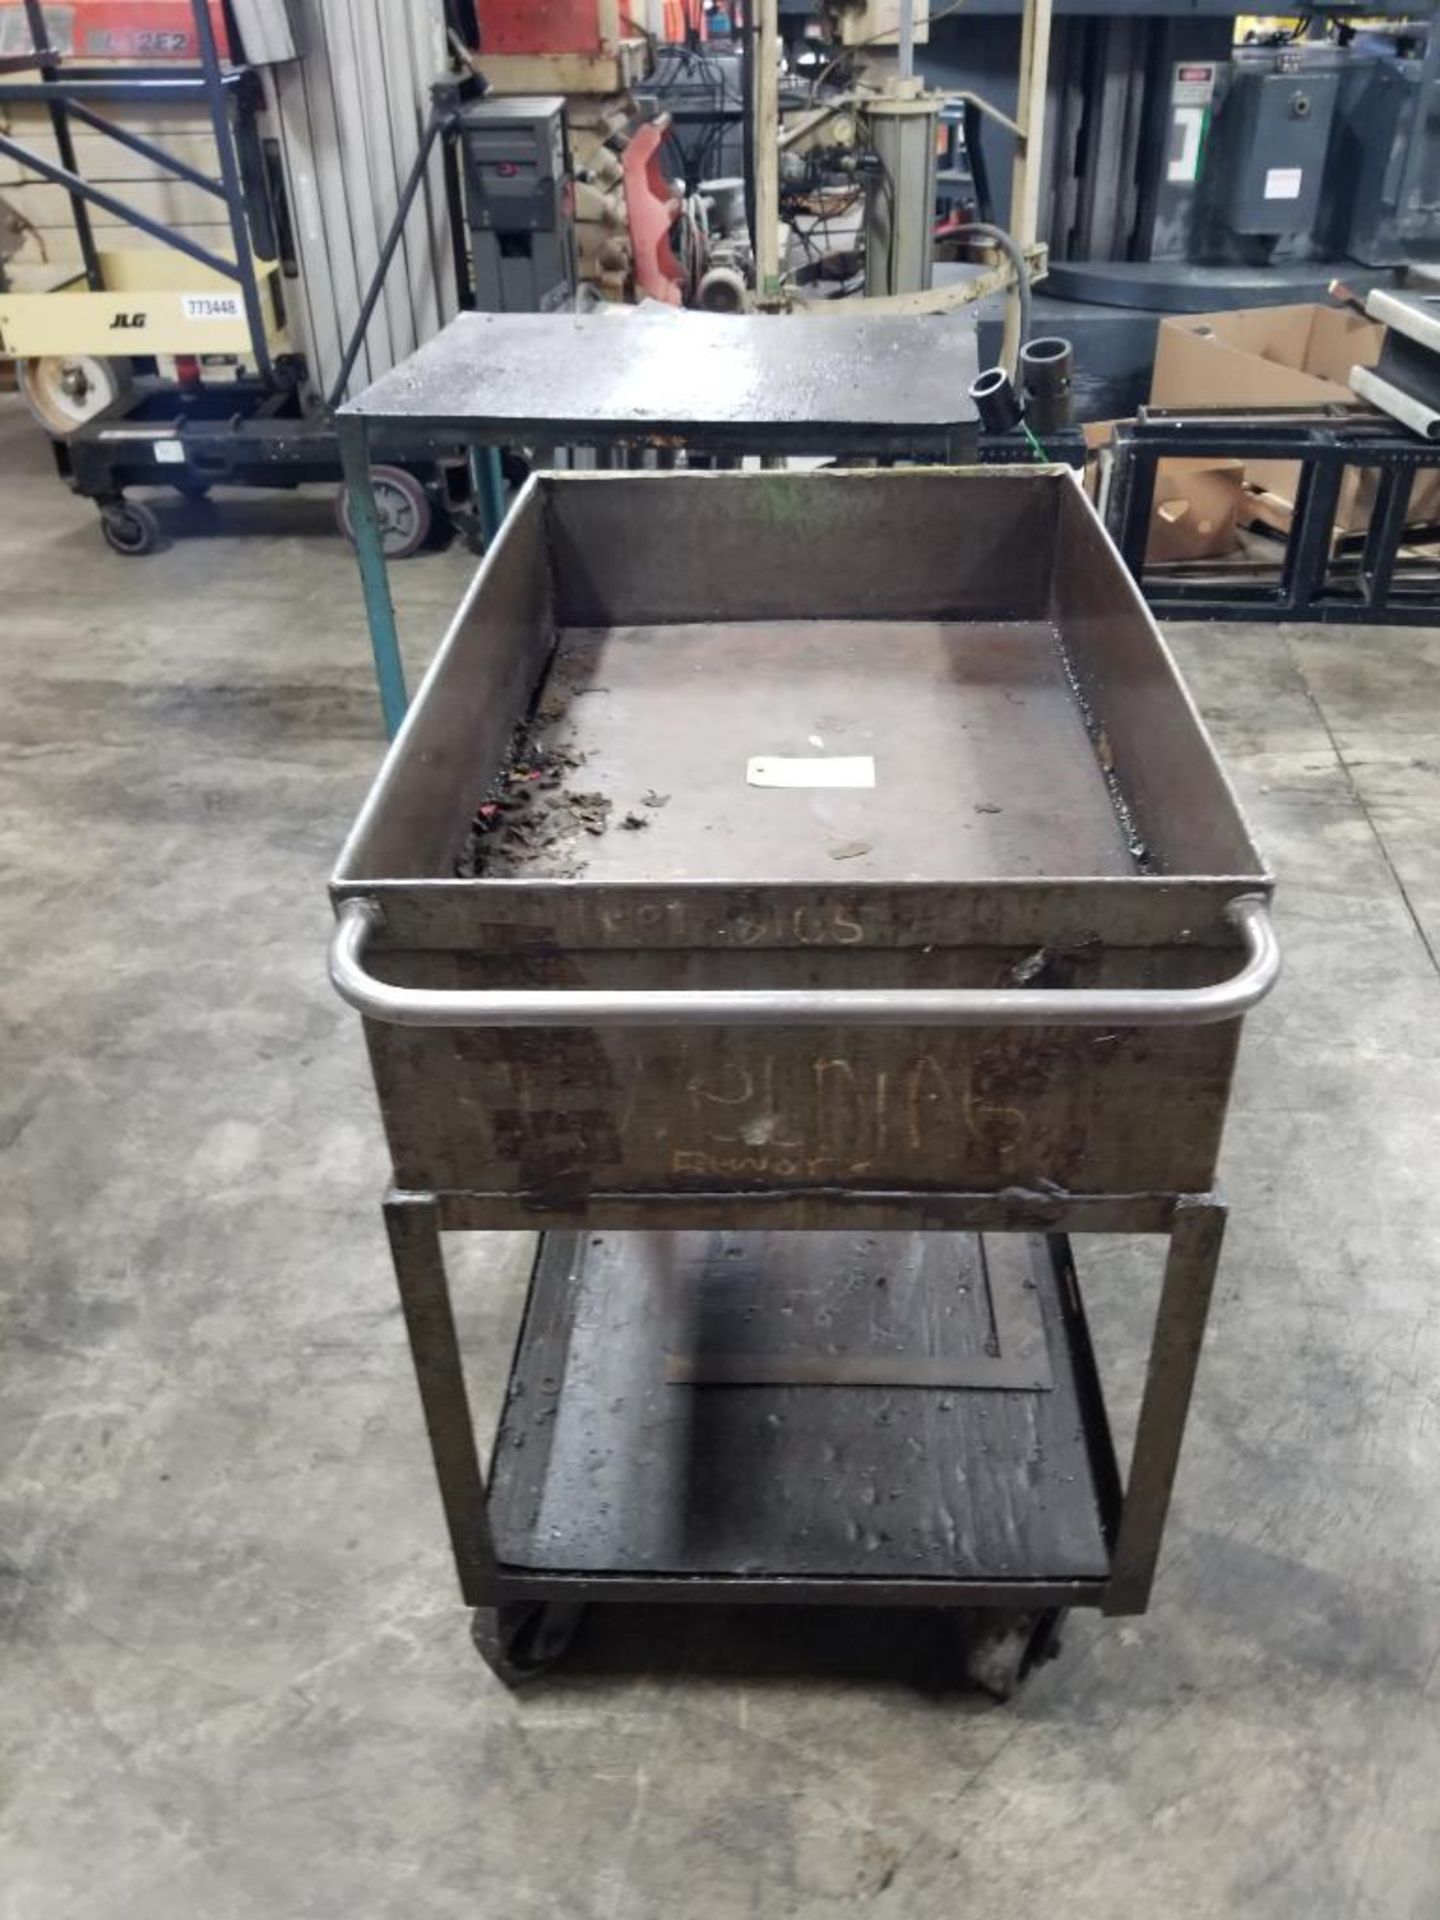 Qty 2 - Industrial work carts. 40x24x37, 39x25x40. LxWxH. - Image 3 of 7